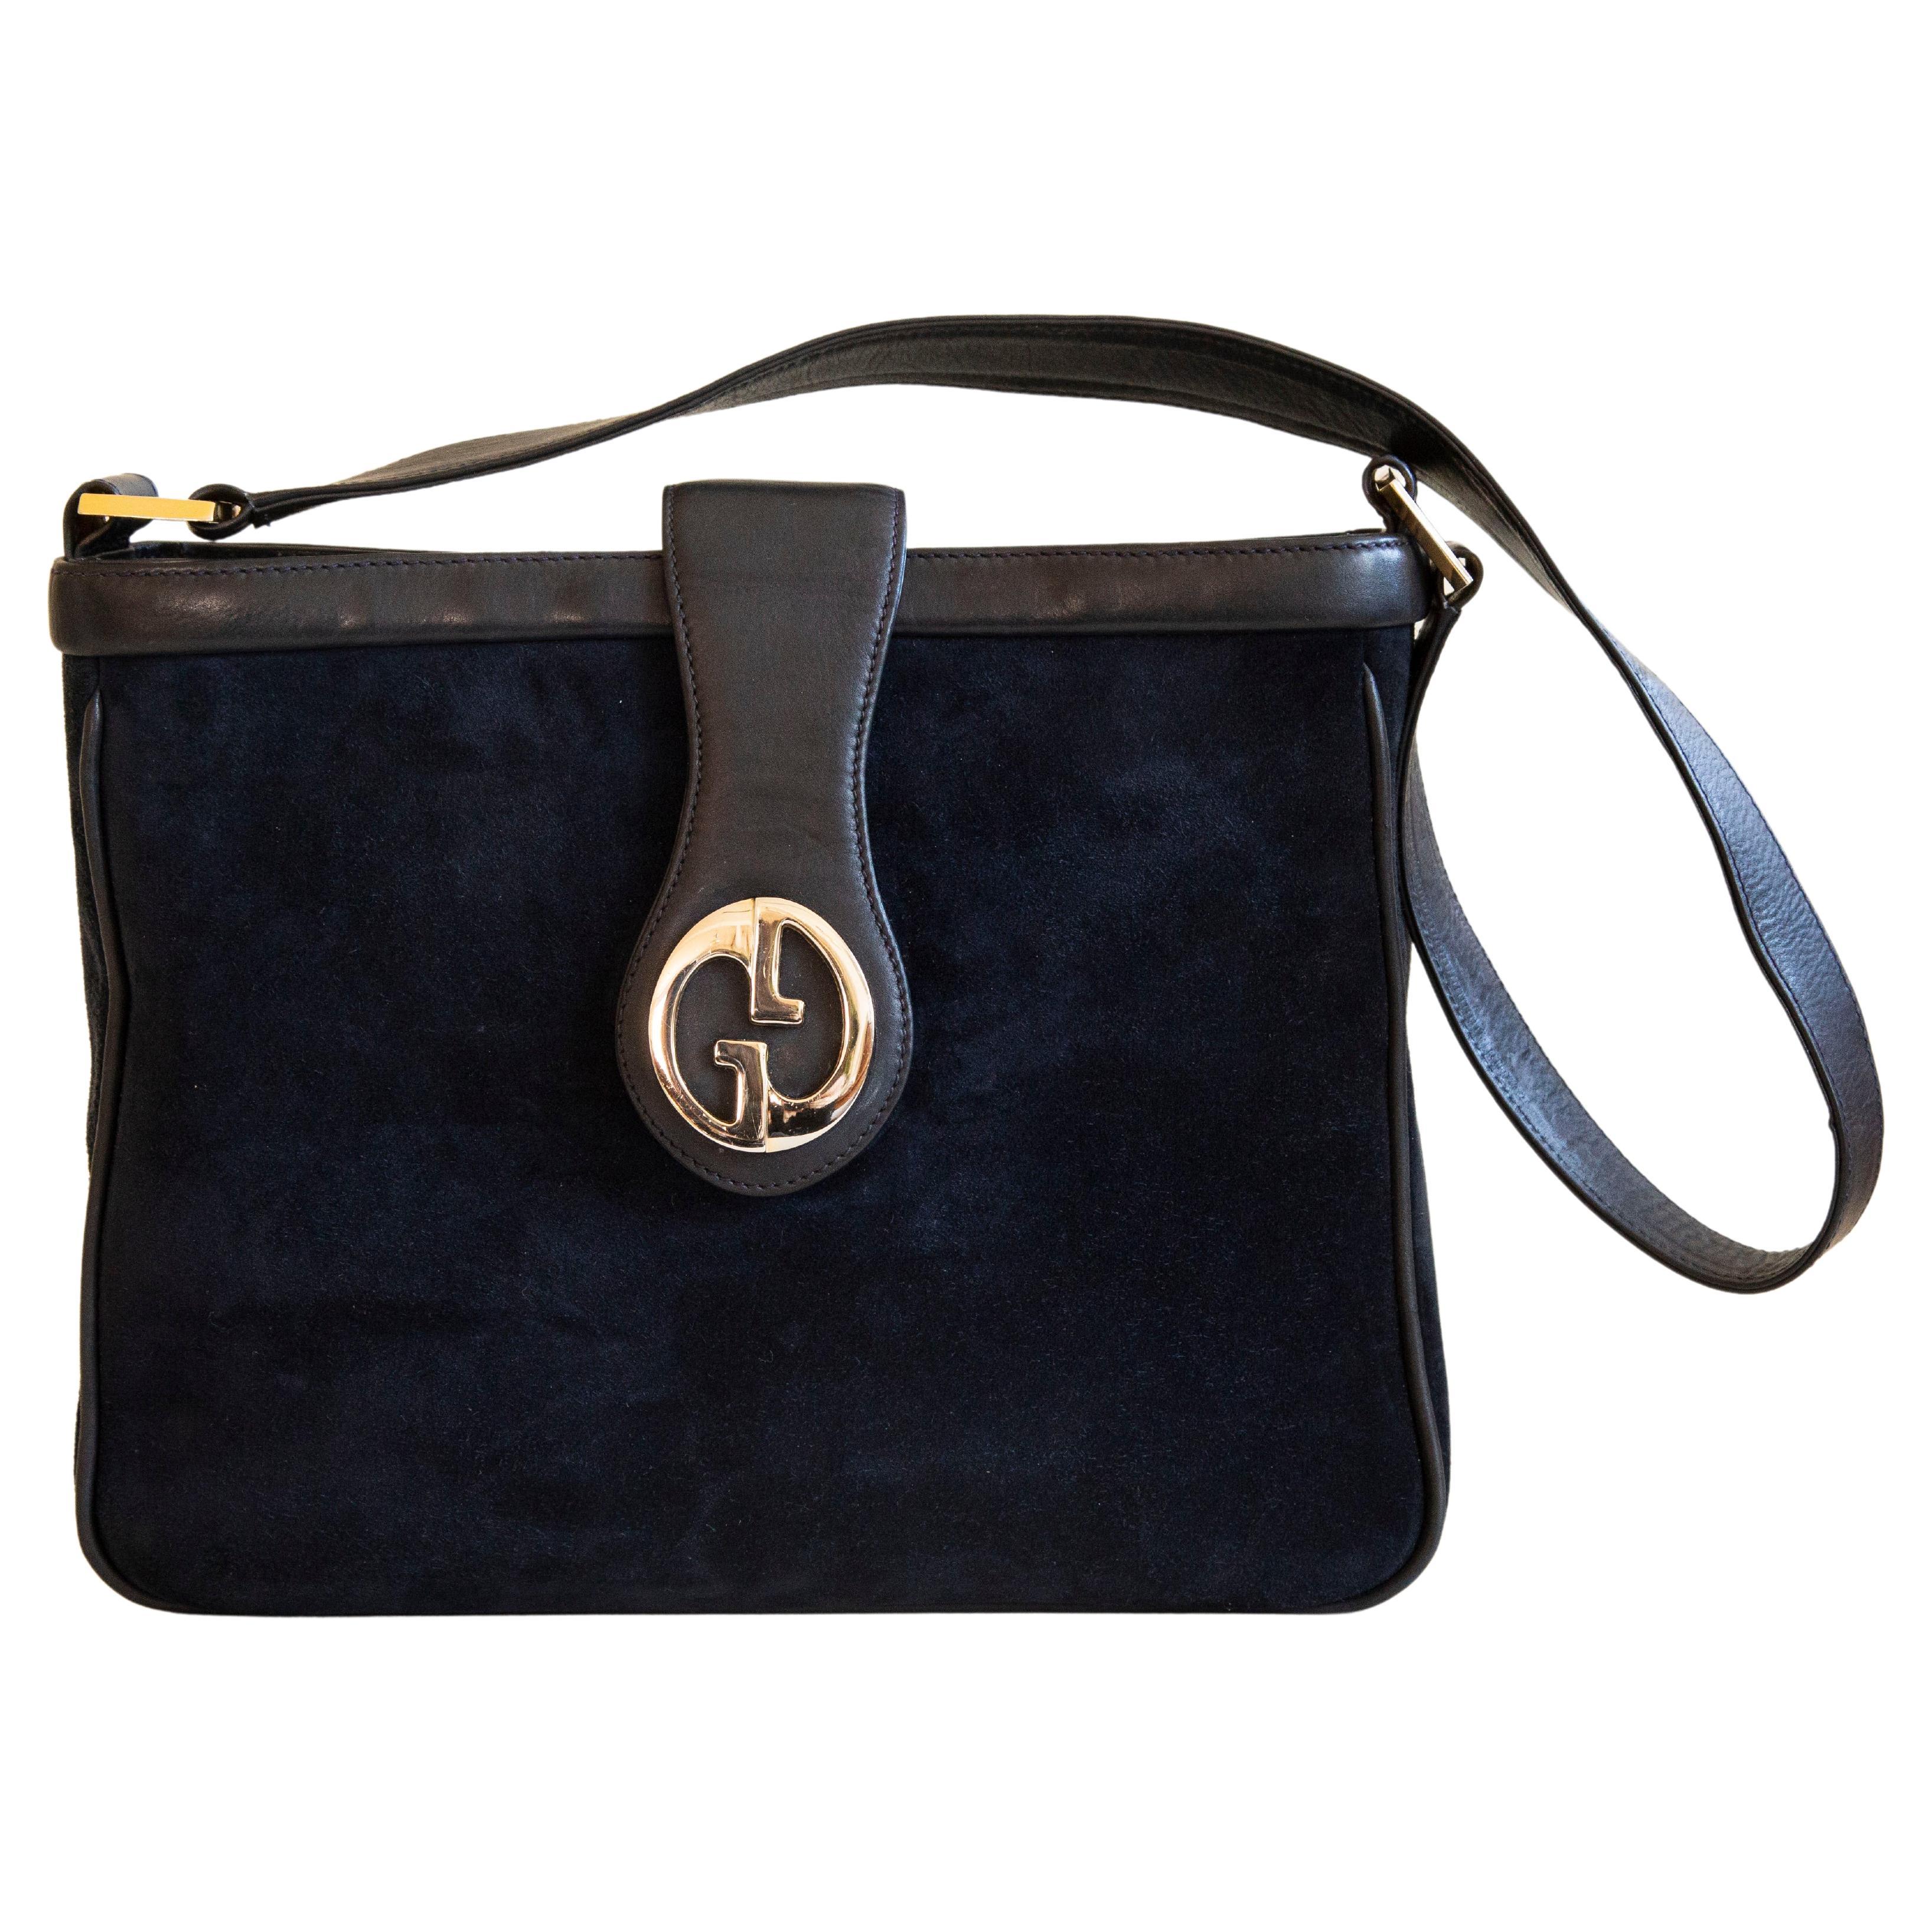 Gucci GG Metal Signature Logo Dark Blue Suede and Leather Shoulder Bag 1970s For Sale